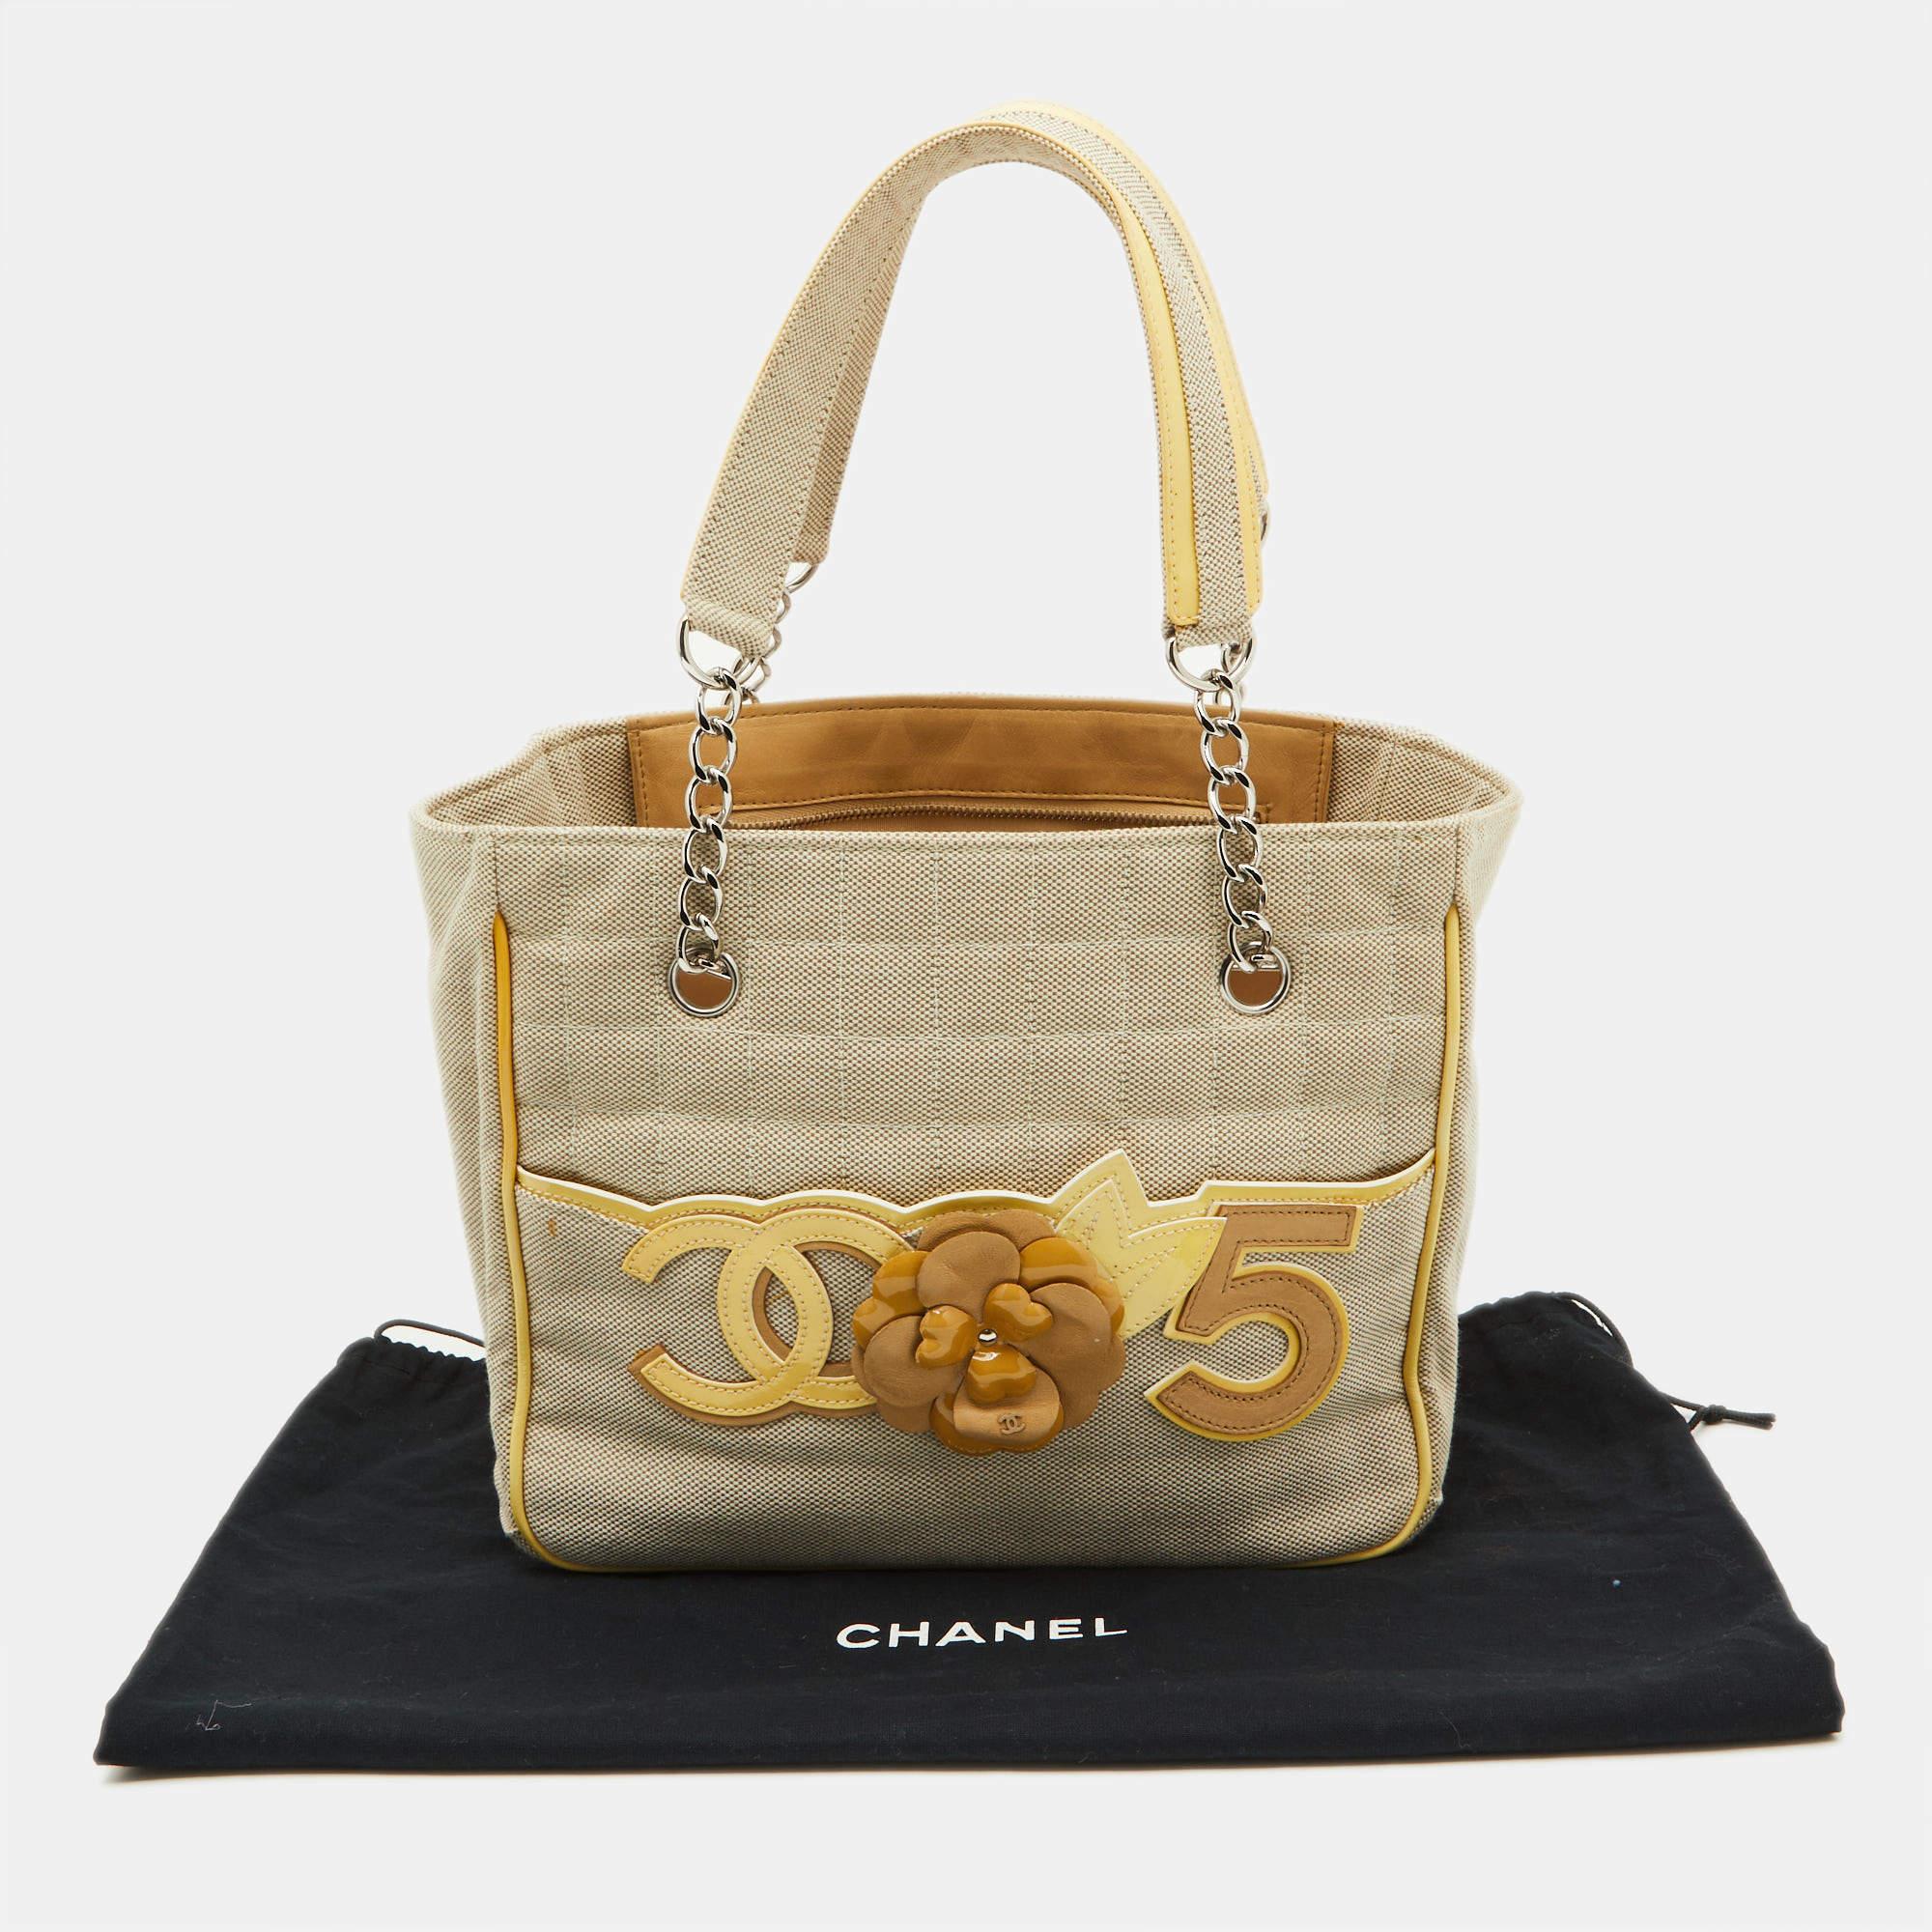 Chanel Beige/Yellow Canvas and Patent Leather Camellia No.5 Tote 10